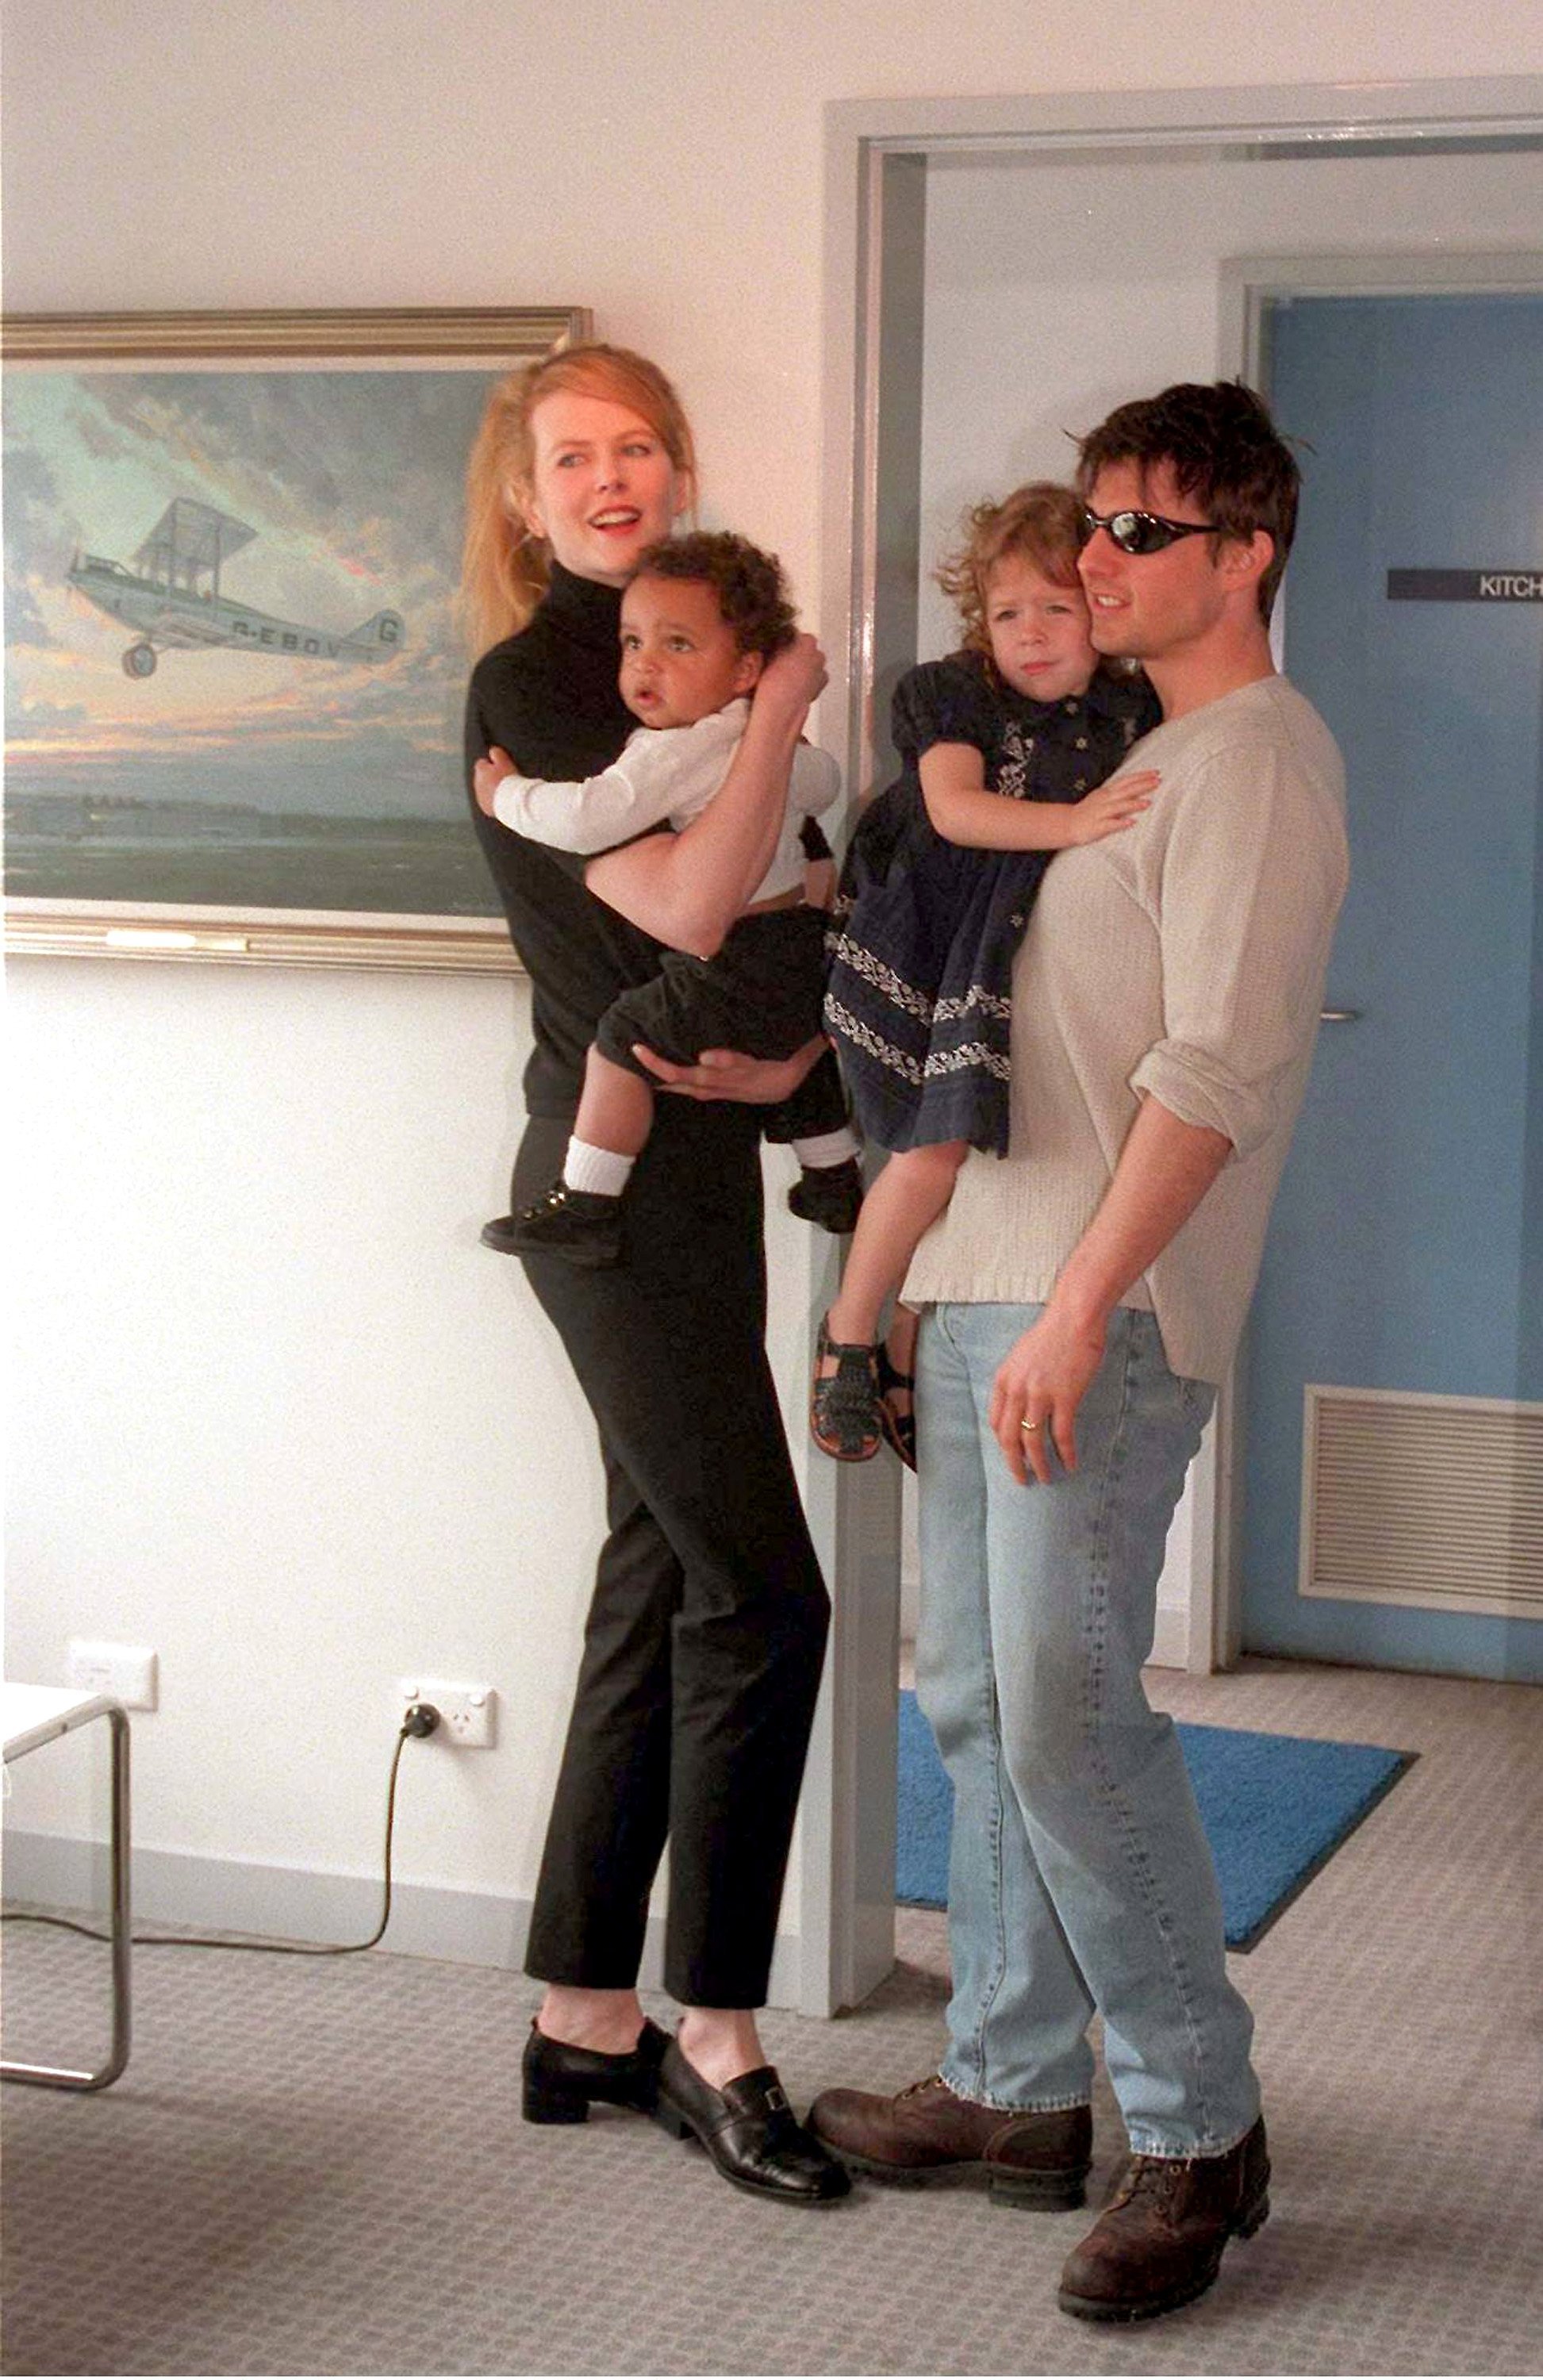 Nicole Kidman and Tom Cruise arrive at Sydney Kingsford Smith airport in Australia with kids Connor and Isabella on January 24, 1996 | Photo: Getty Images